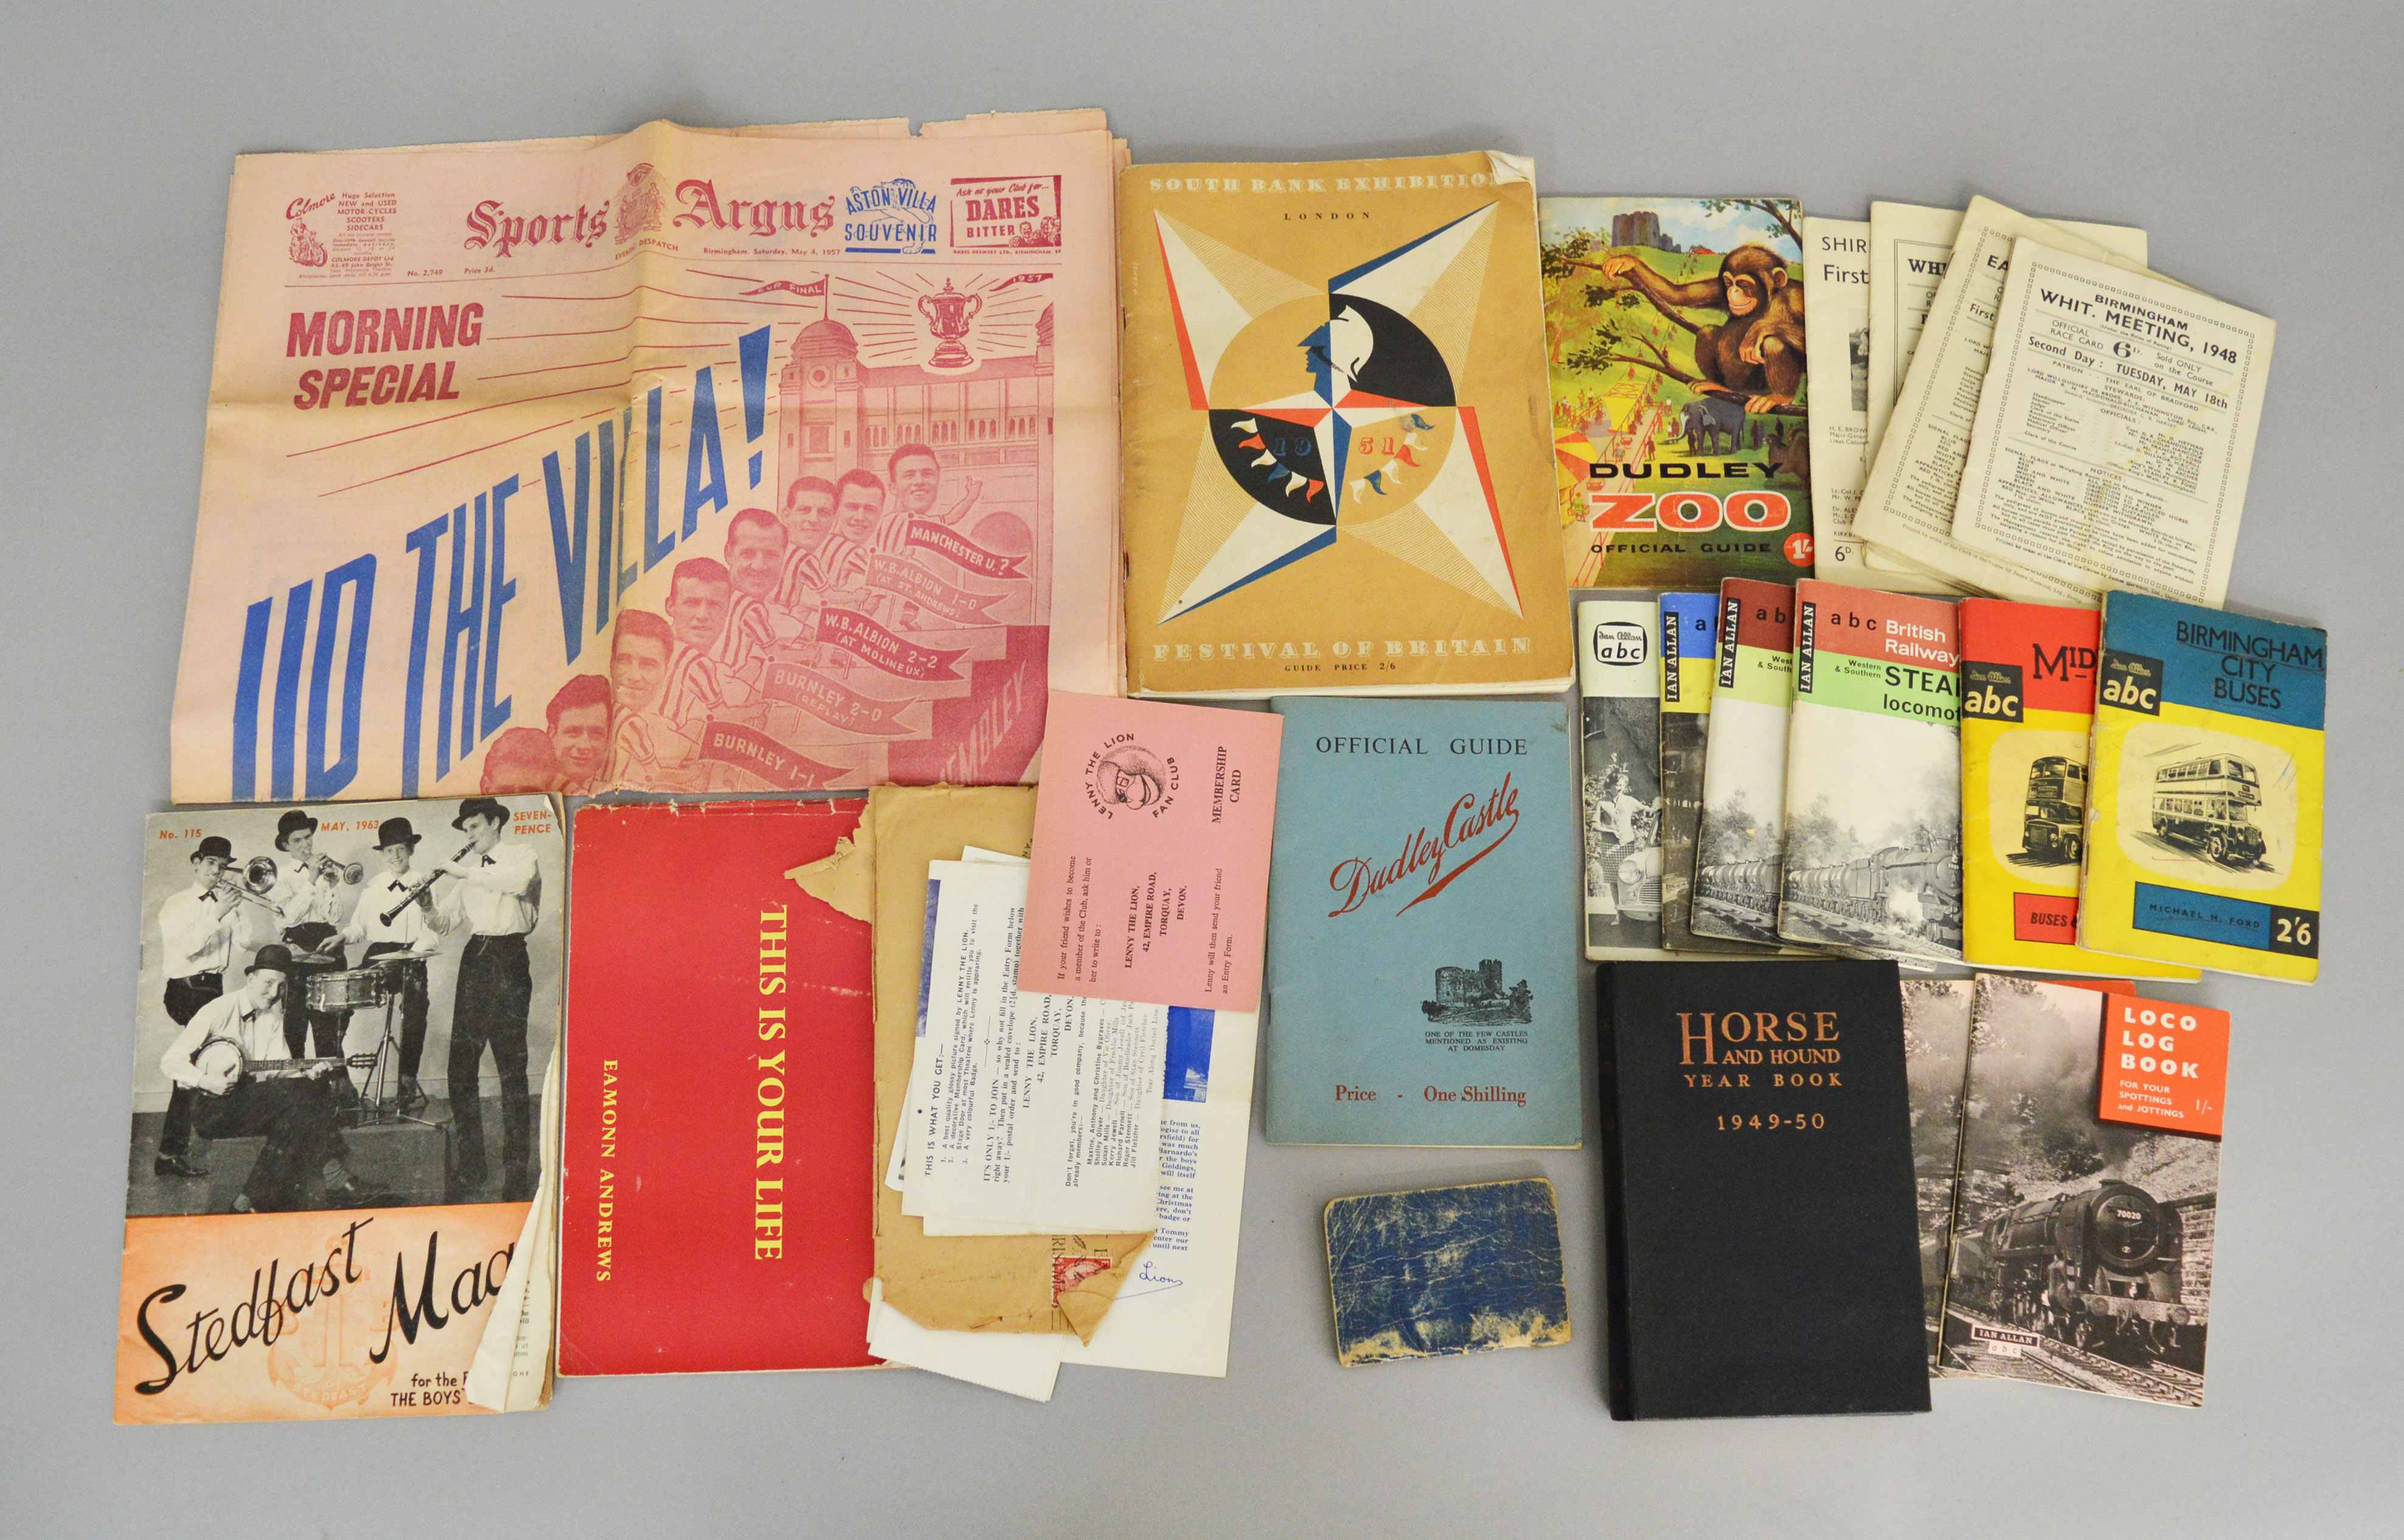 A mixed lot of vintage books and brochures including a Dudley Zoo official guide and a Horse and